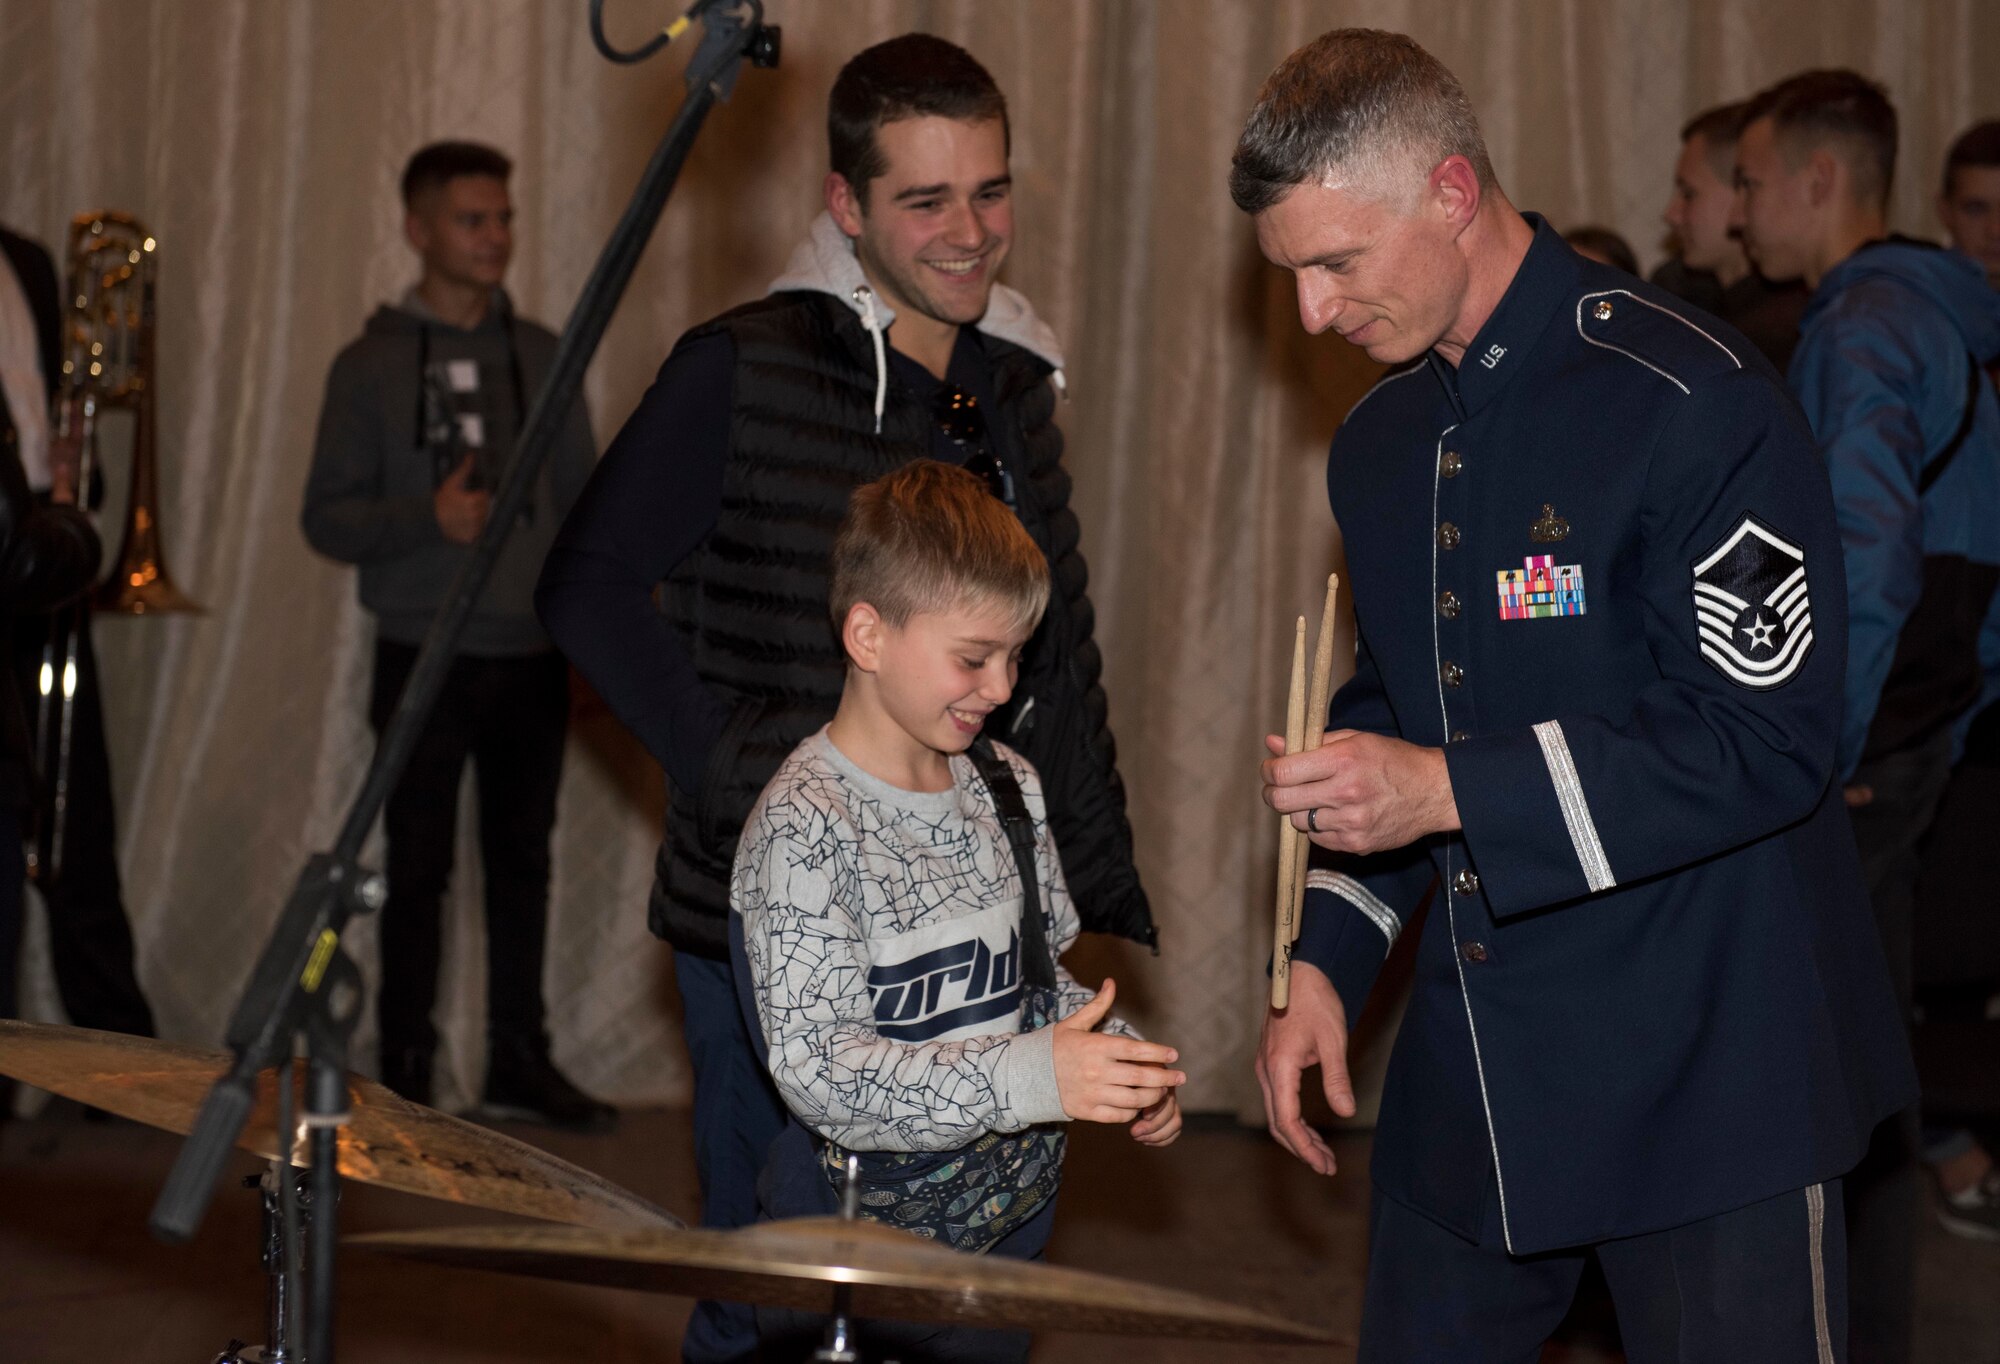 U.S. Air Force Master Sgt. Tim Stombaugh, U.S. Air Forces in Europe Ambassadors Jazz Band drummer, hands drum sticks to a local music student during a master class with the USAFE Band and the Ukrainian National Presidential Orchestra at the Philharmonic in Chernivisti, Ukraine, Oct. 12, 2019. The USAFE Band traveled to six cities in central and western Ukraine October 6-20, 2019 to conduct the “Music of Freedom” tour, which celebrated the shared spirit of freedom and enduring partnership between U.S. and Ukrainian armed forces. (U.S. Air Force photo by Airman 1st Class Jennifer Zima)